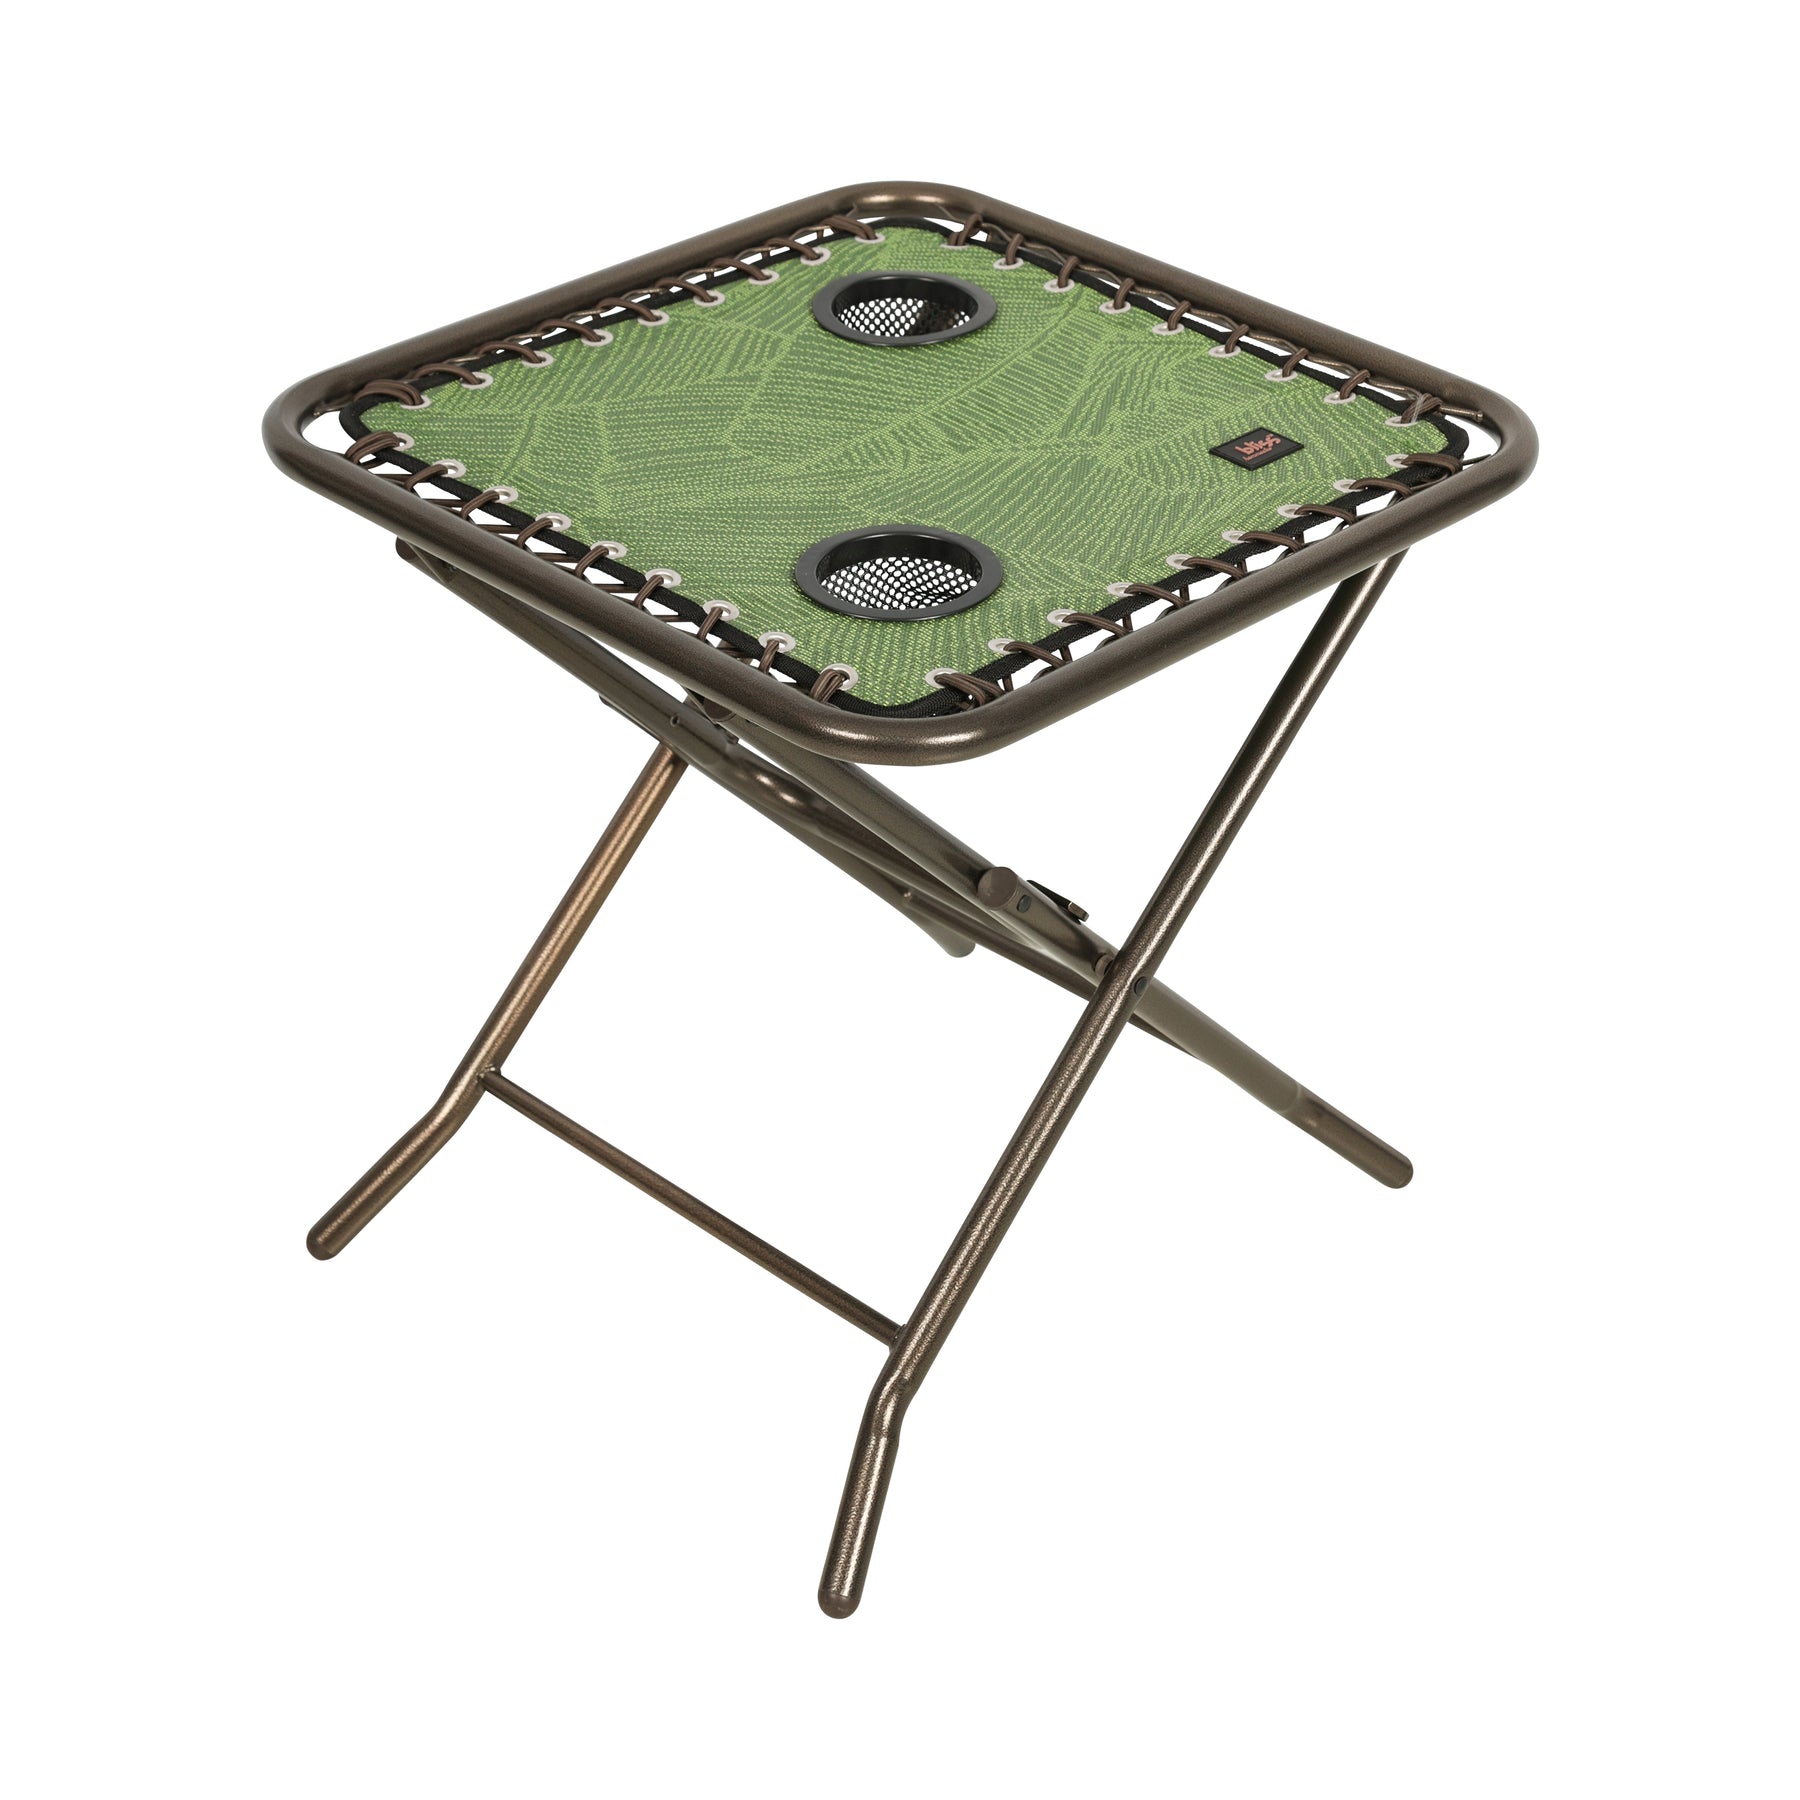 Bliss Hammocks 20-inch Folding Side Table with 2 Built-In Cup Holders in the green banana leaves variation.